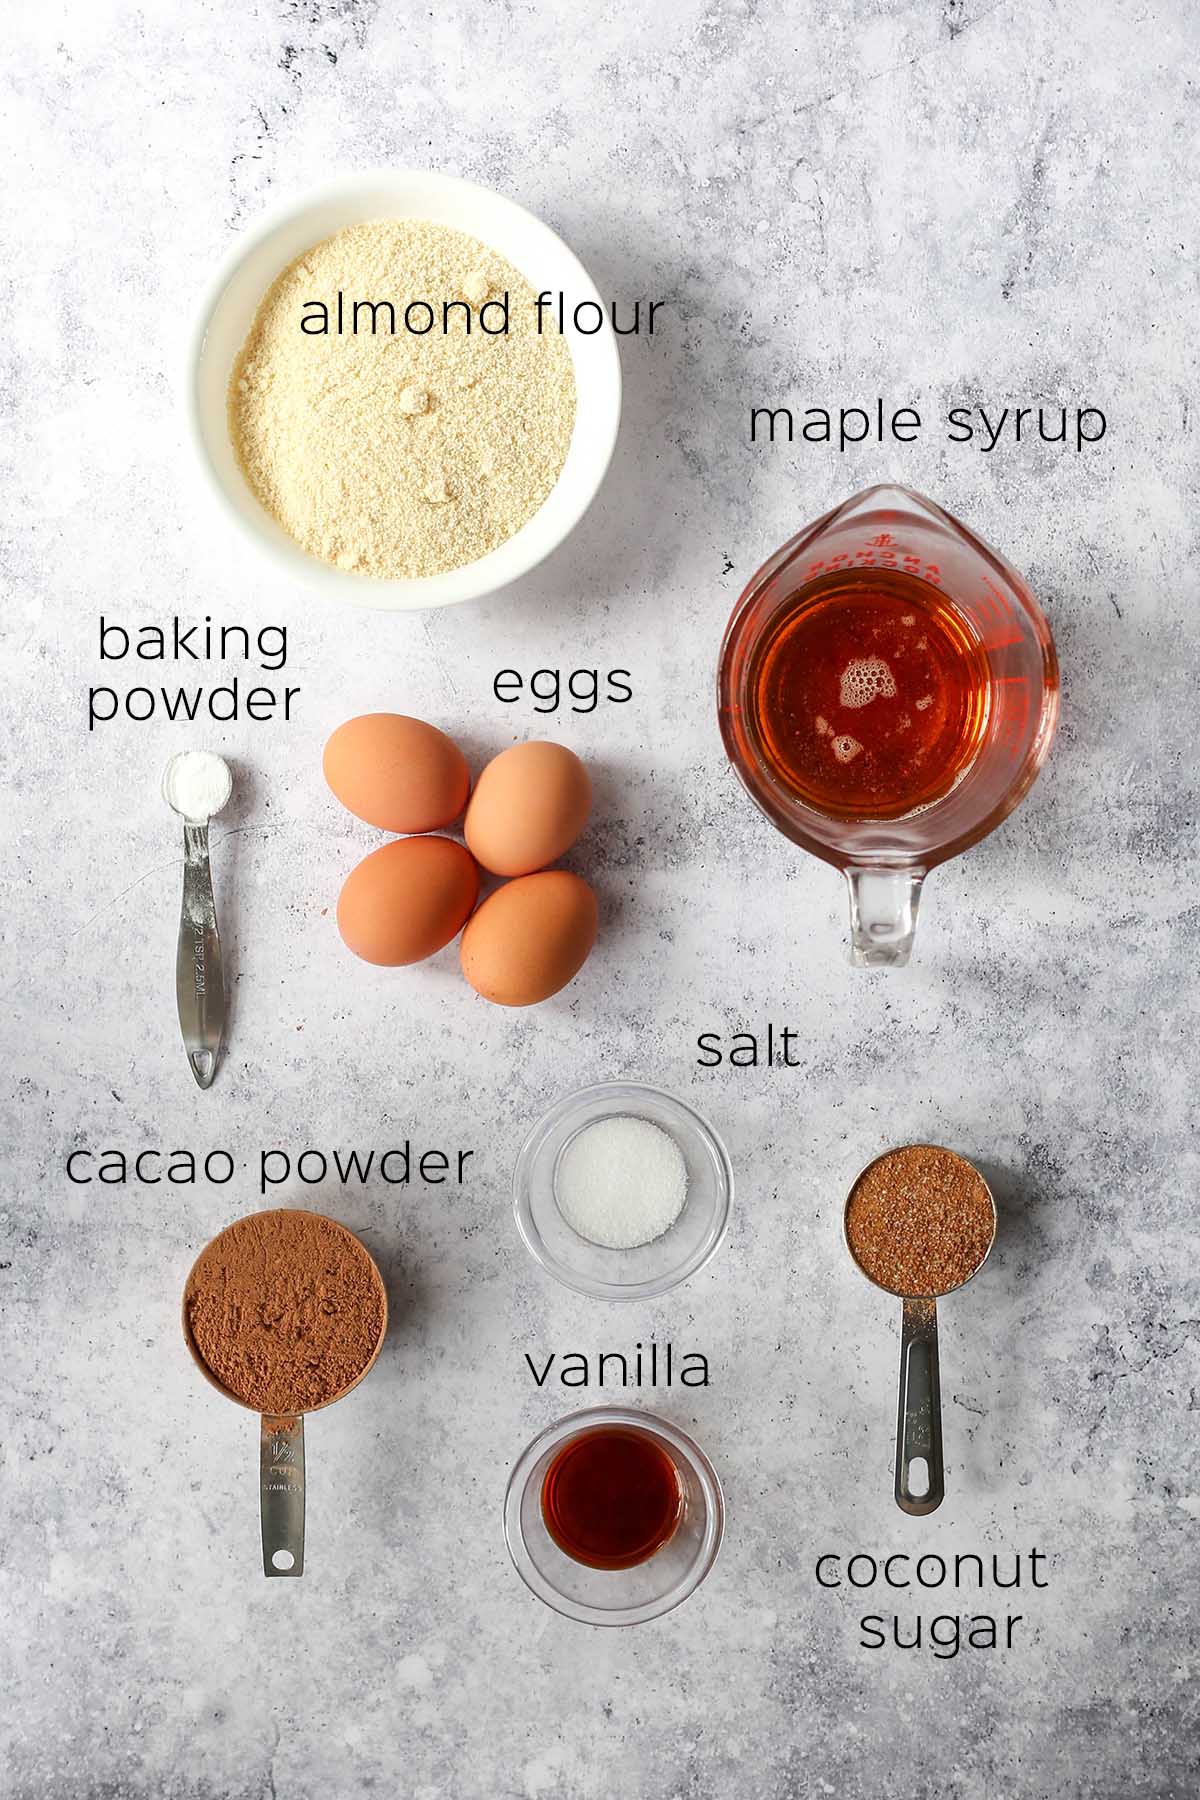 the ingredients required to make the chocolate cake with almond flour